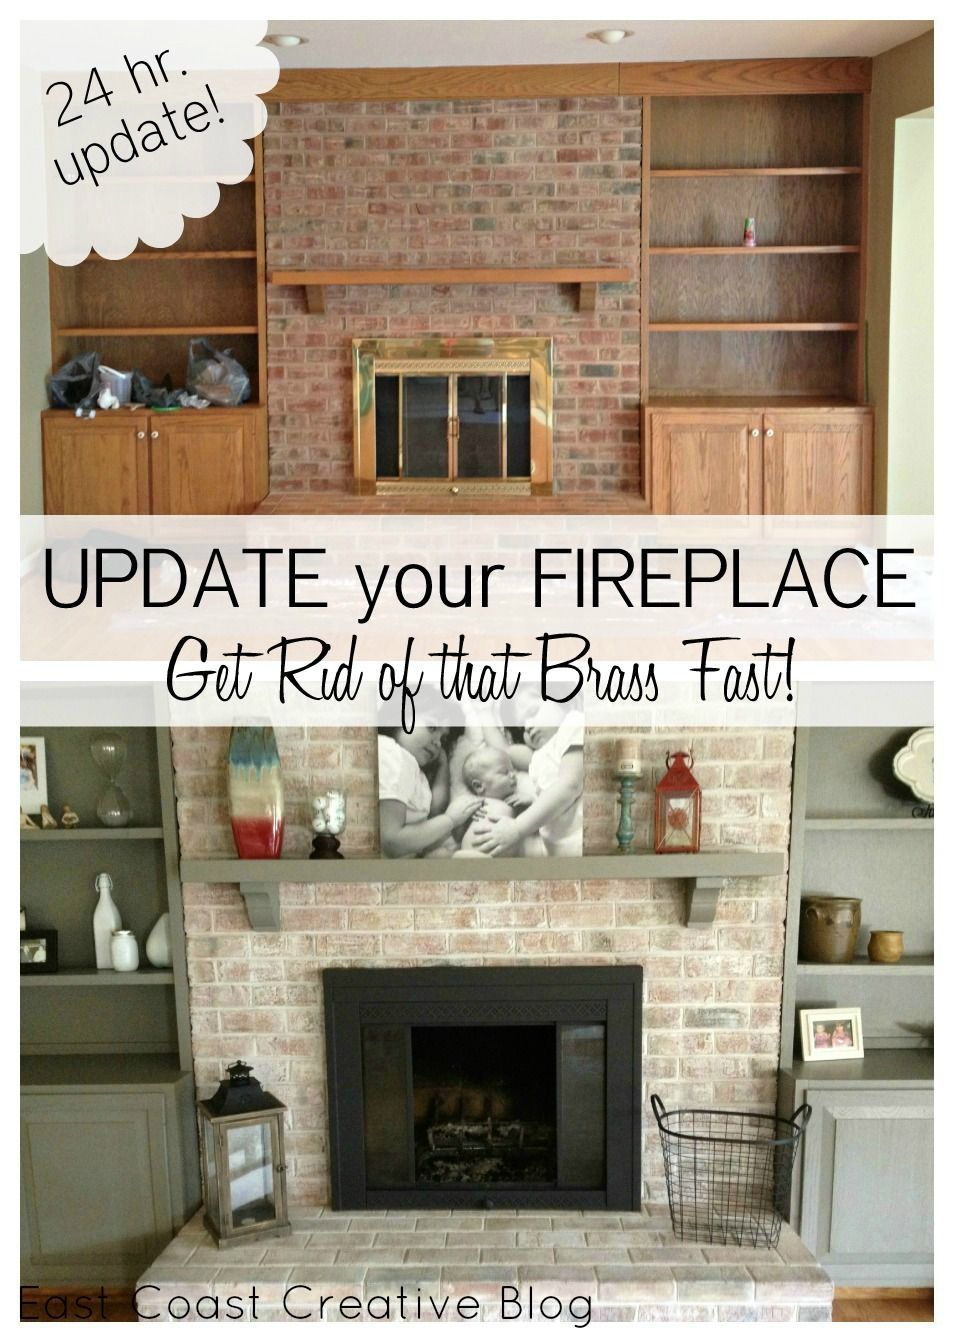 Fireplace makeover including painted mantel and shelves, white washed brick and spray painted brass surround